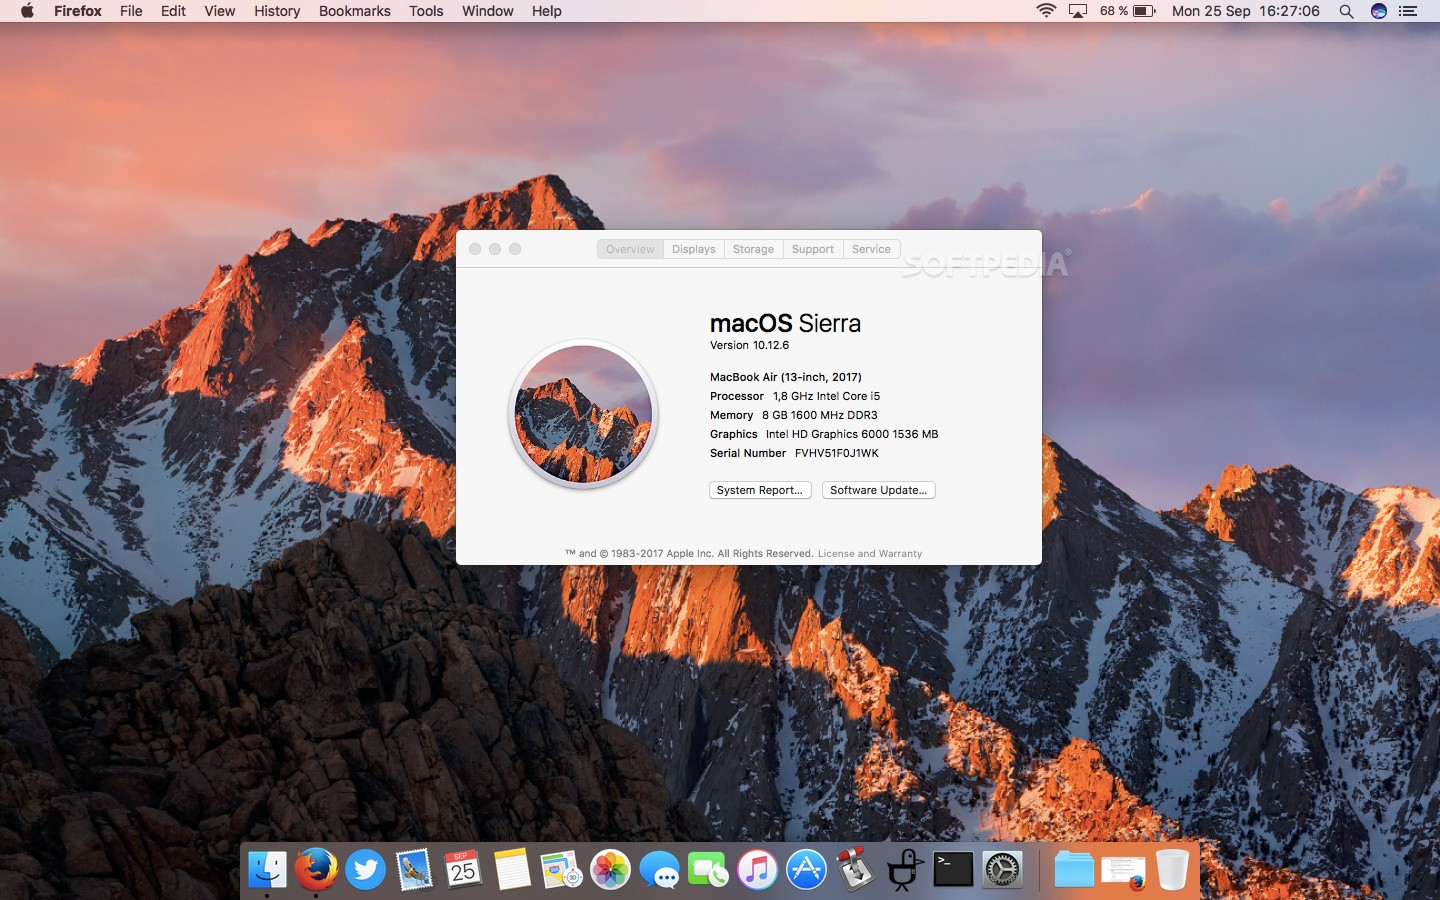 how to update to macos 10.13